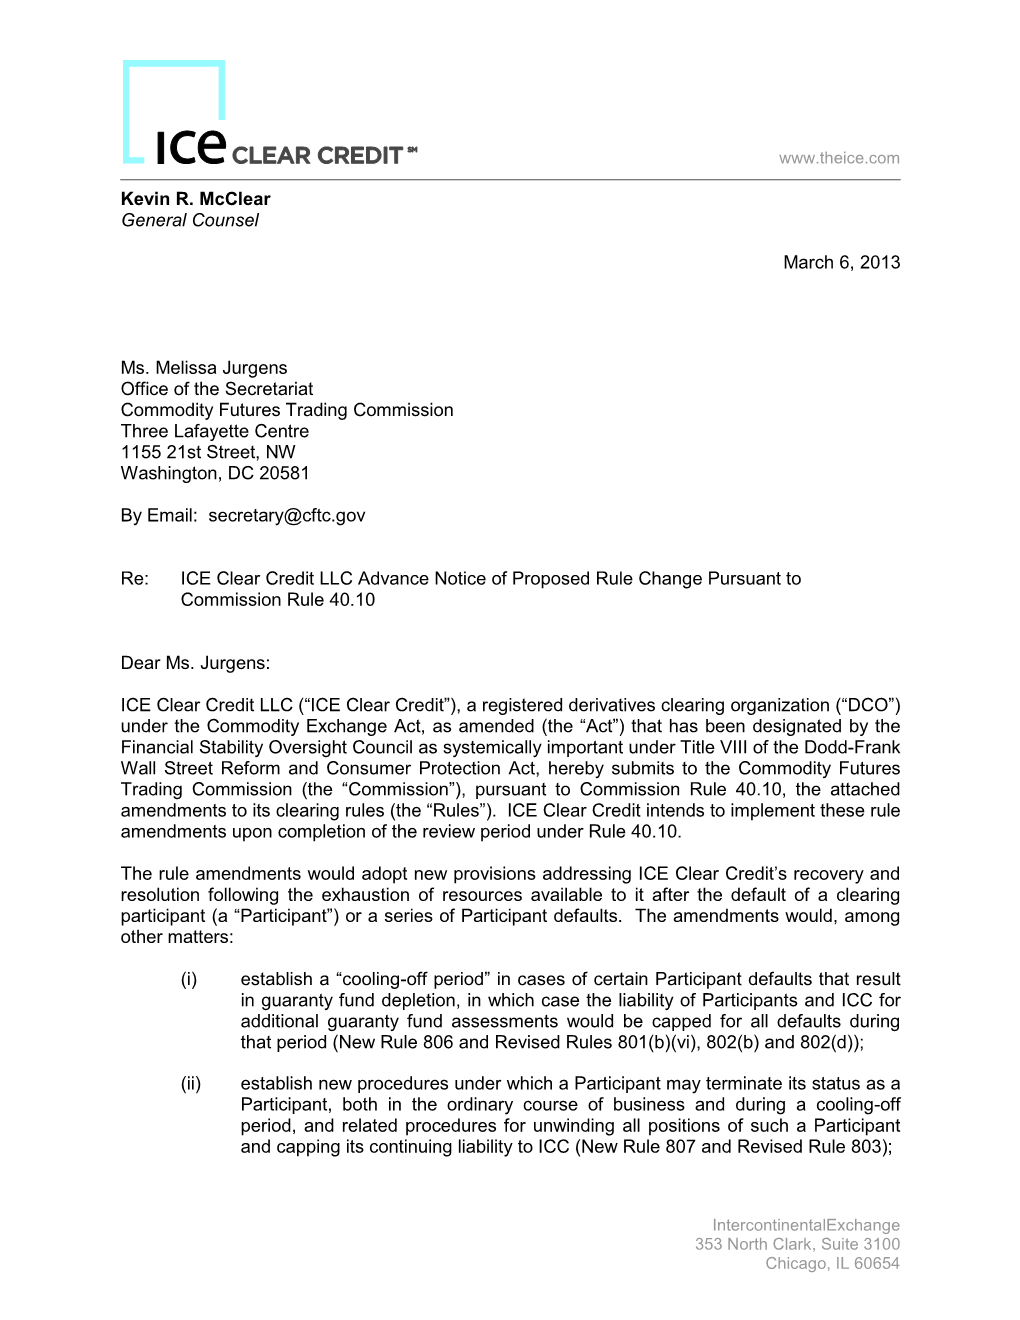 ICE Clear Credit Rule Submission, March 6, 2013